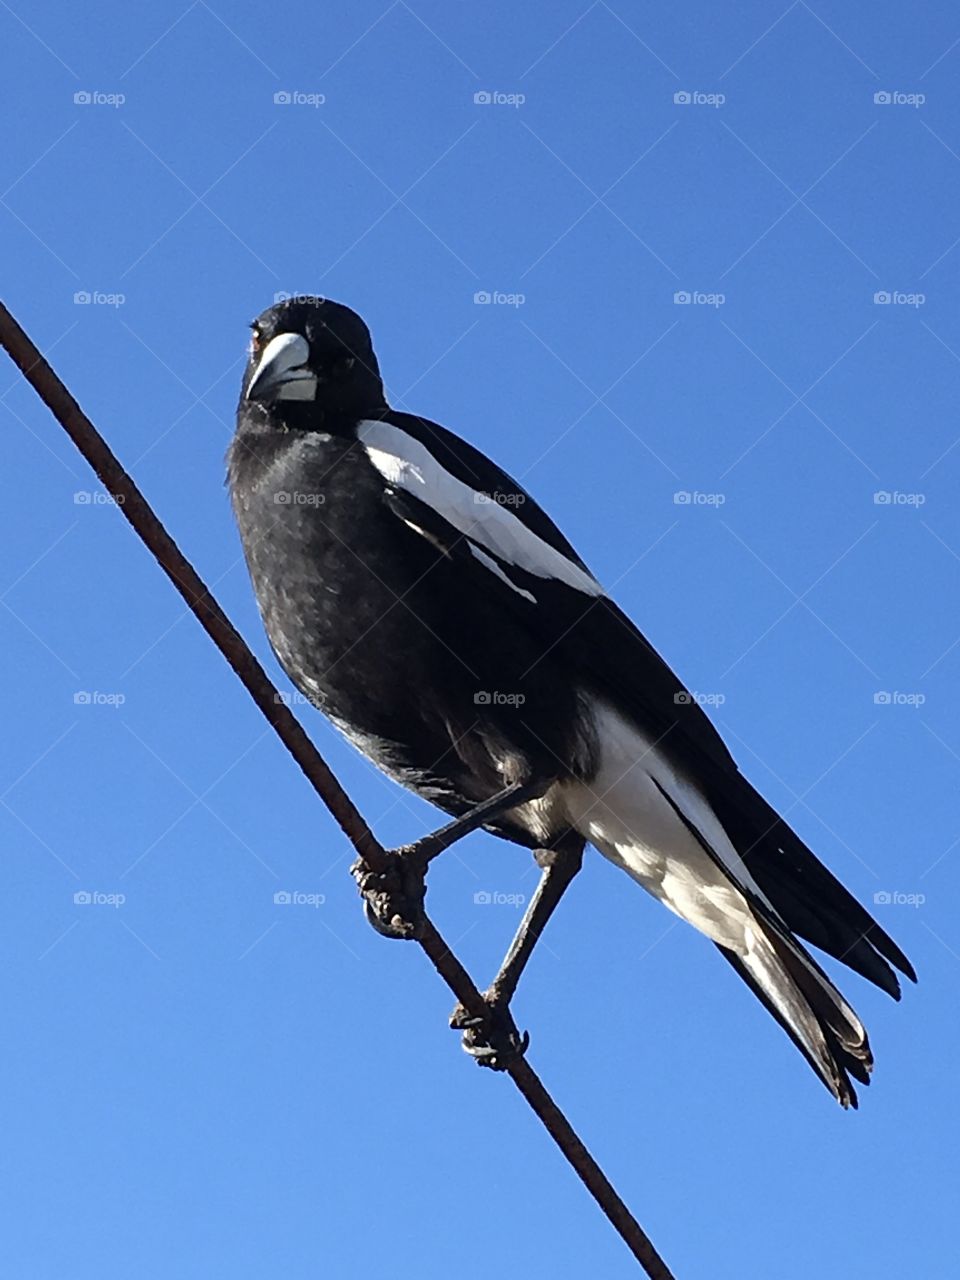 Australian magpie closeup on a wire